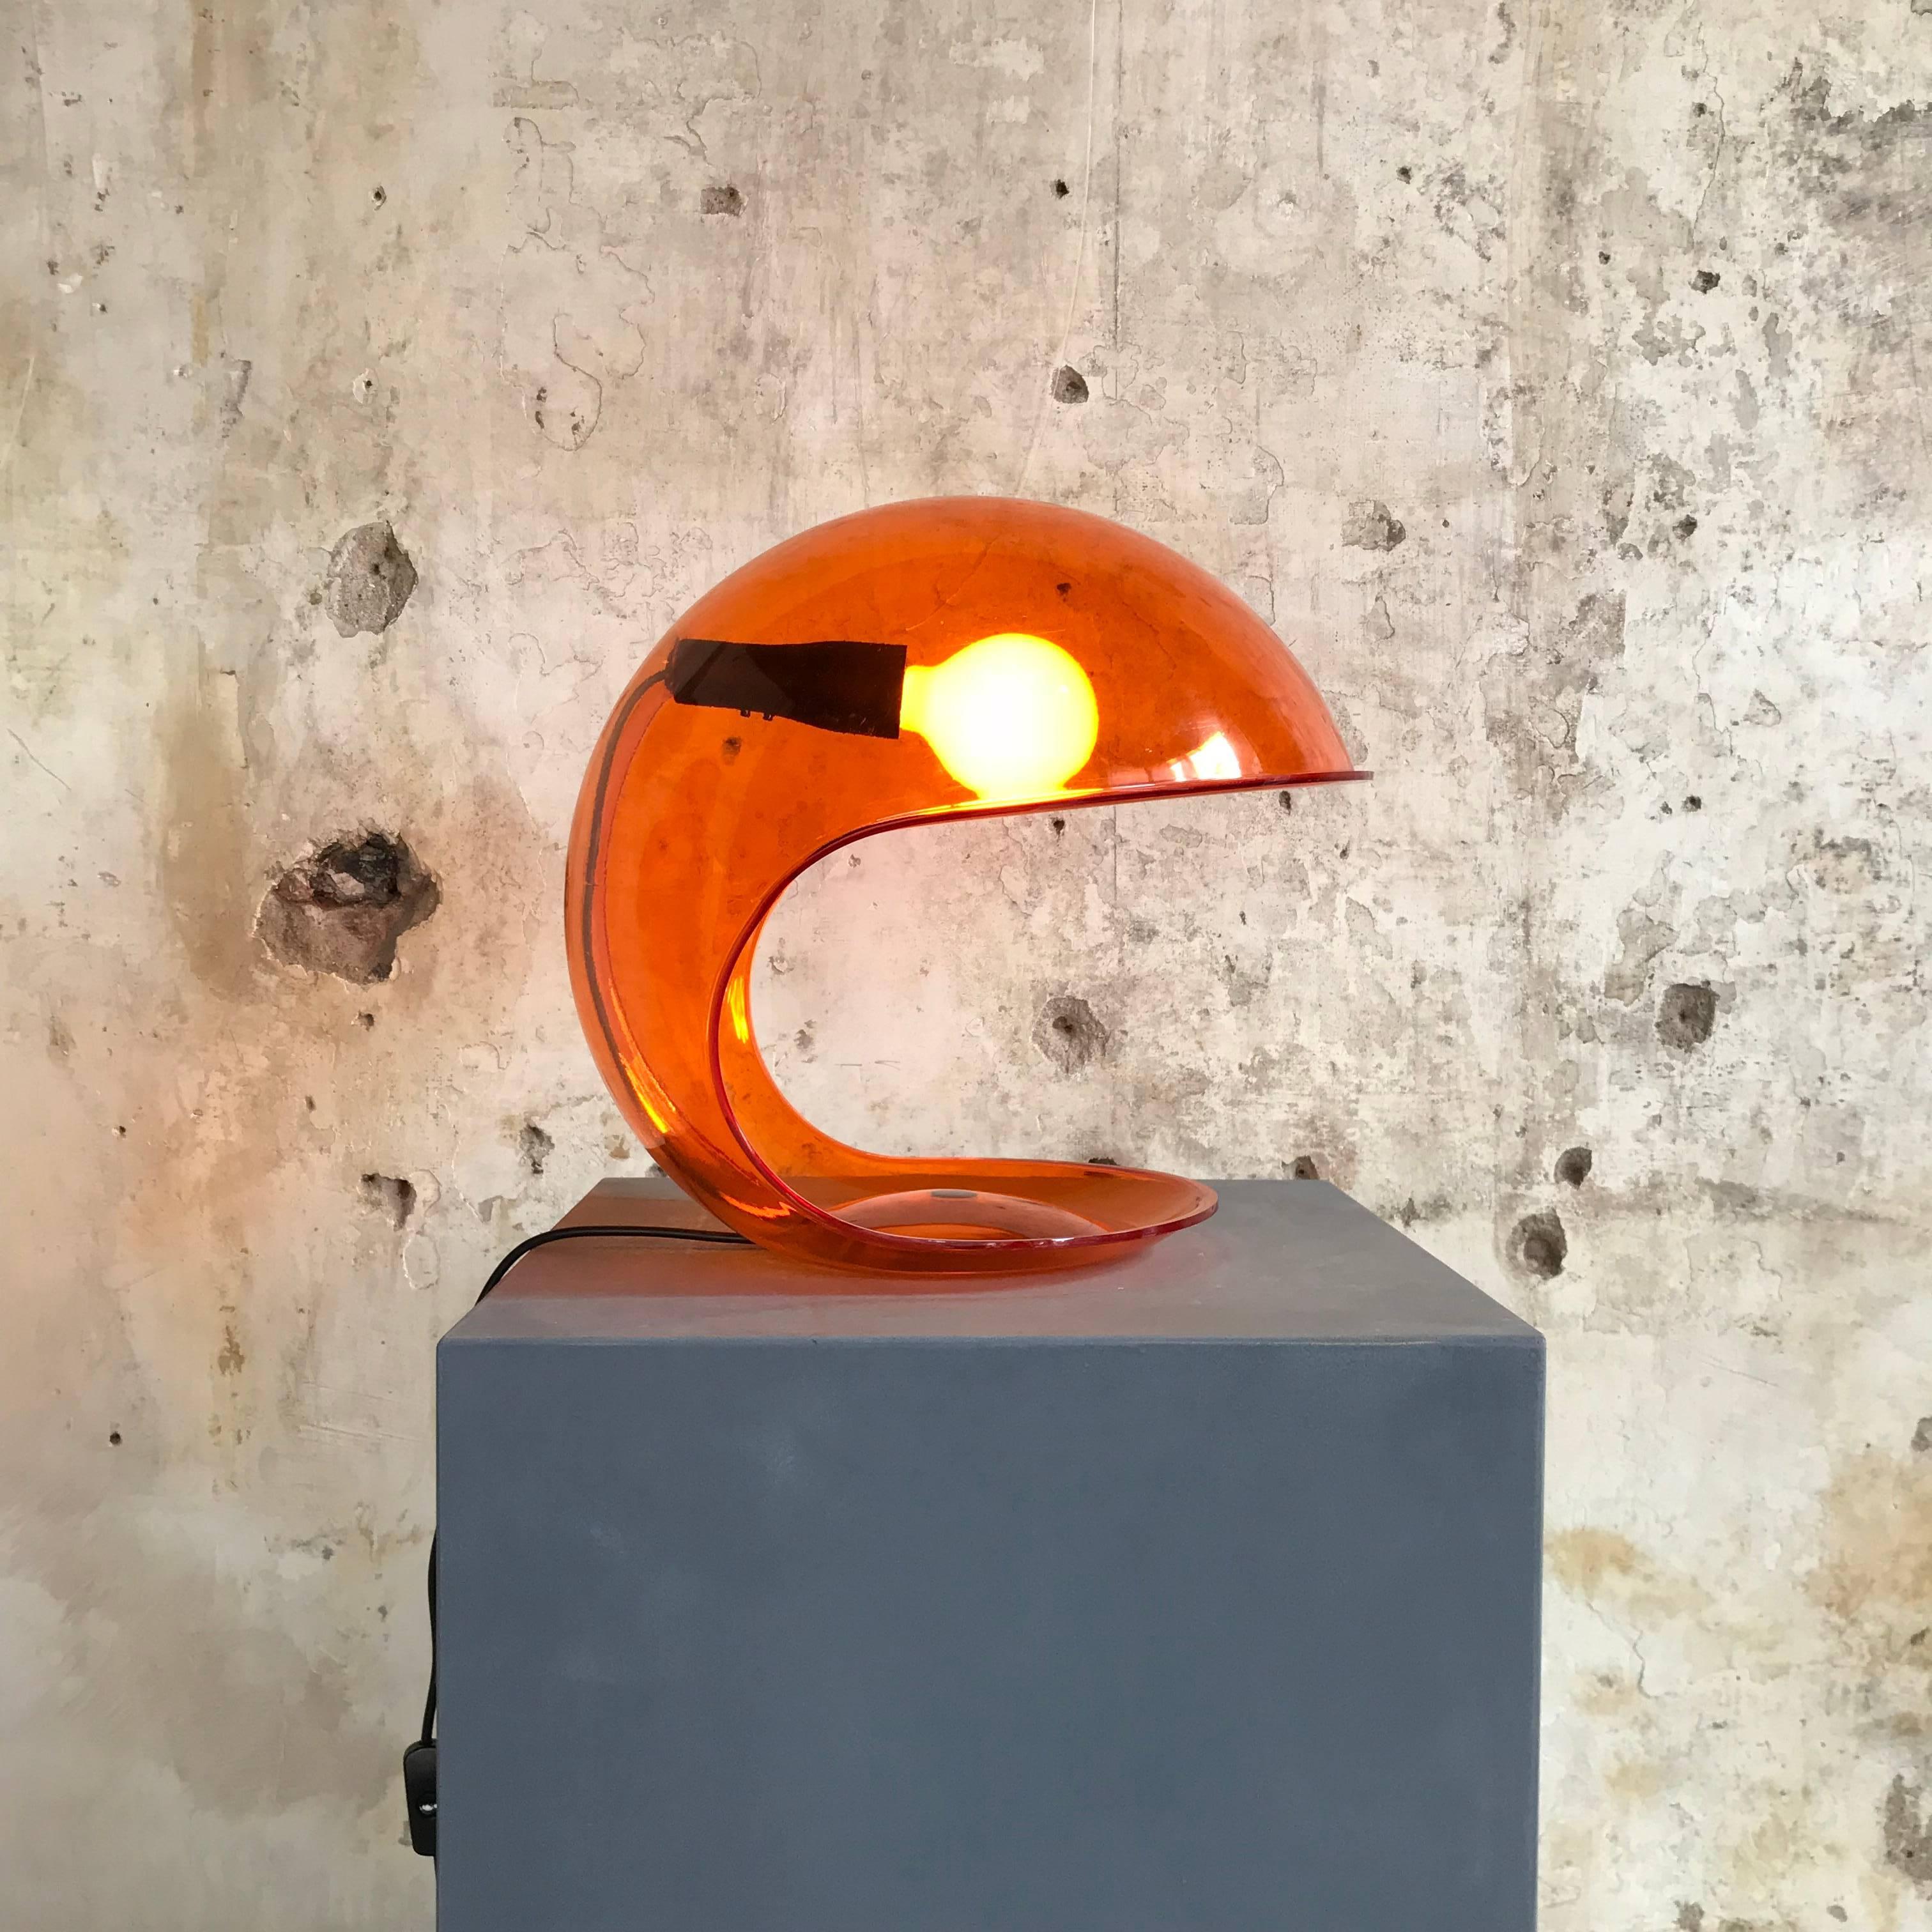 Vintage ‘Foglia’ table Lamp designed in 1969 by Elio Martinelli and produced by Martinelli Luce in Italy. A well shaped lamp made of transparent Methacrylate in the rare color orange. It concerns an original old version, (approx.) 40 years old.